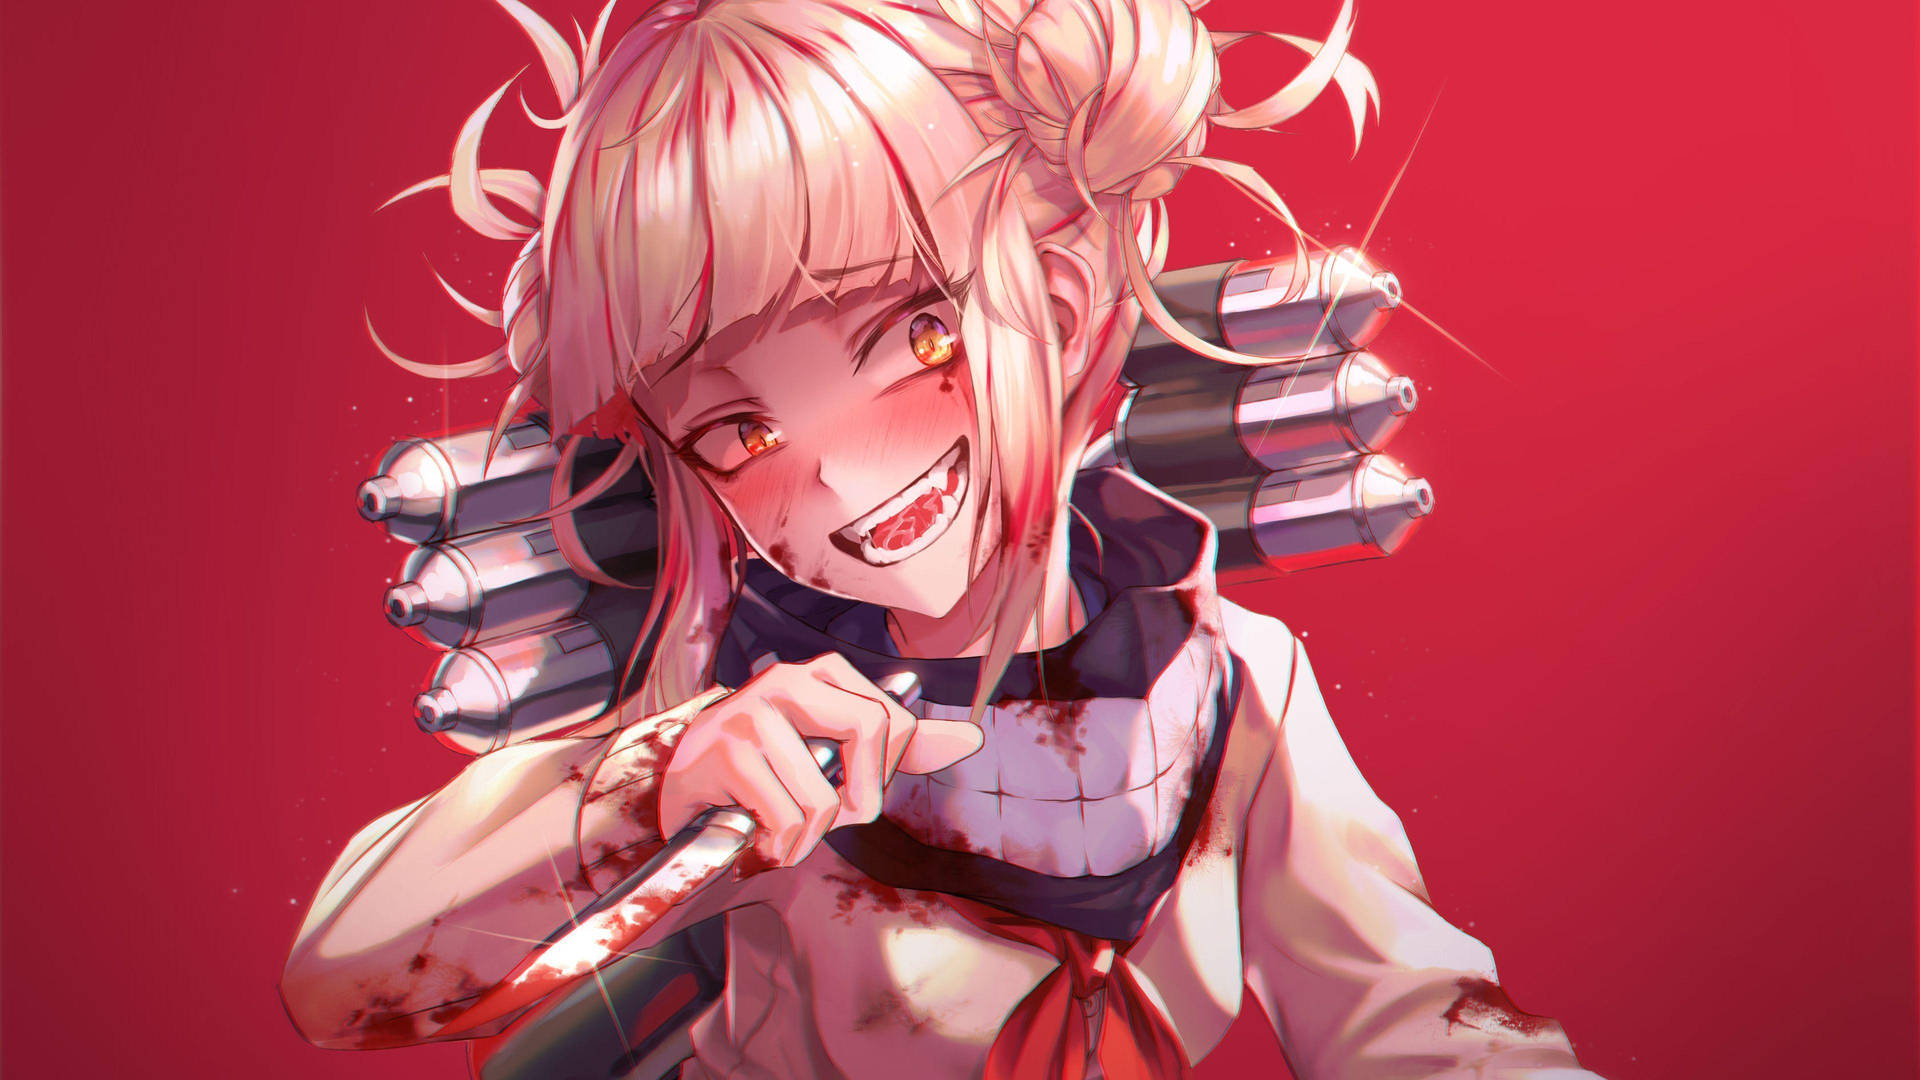 Himiko Toga Bloody Red Art